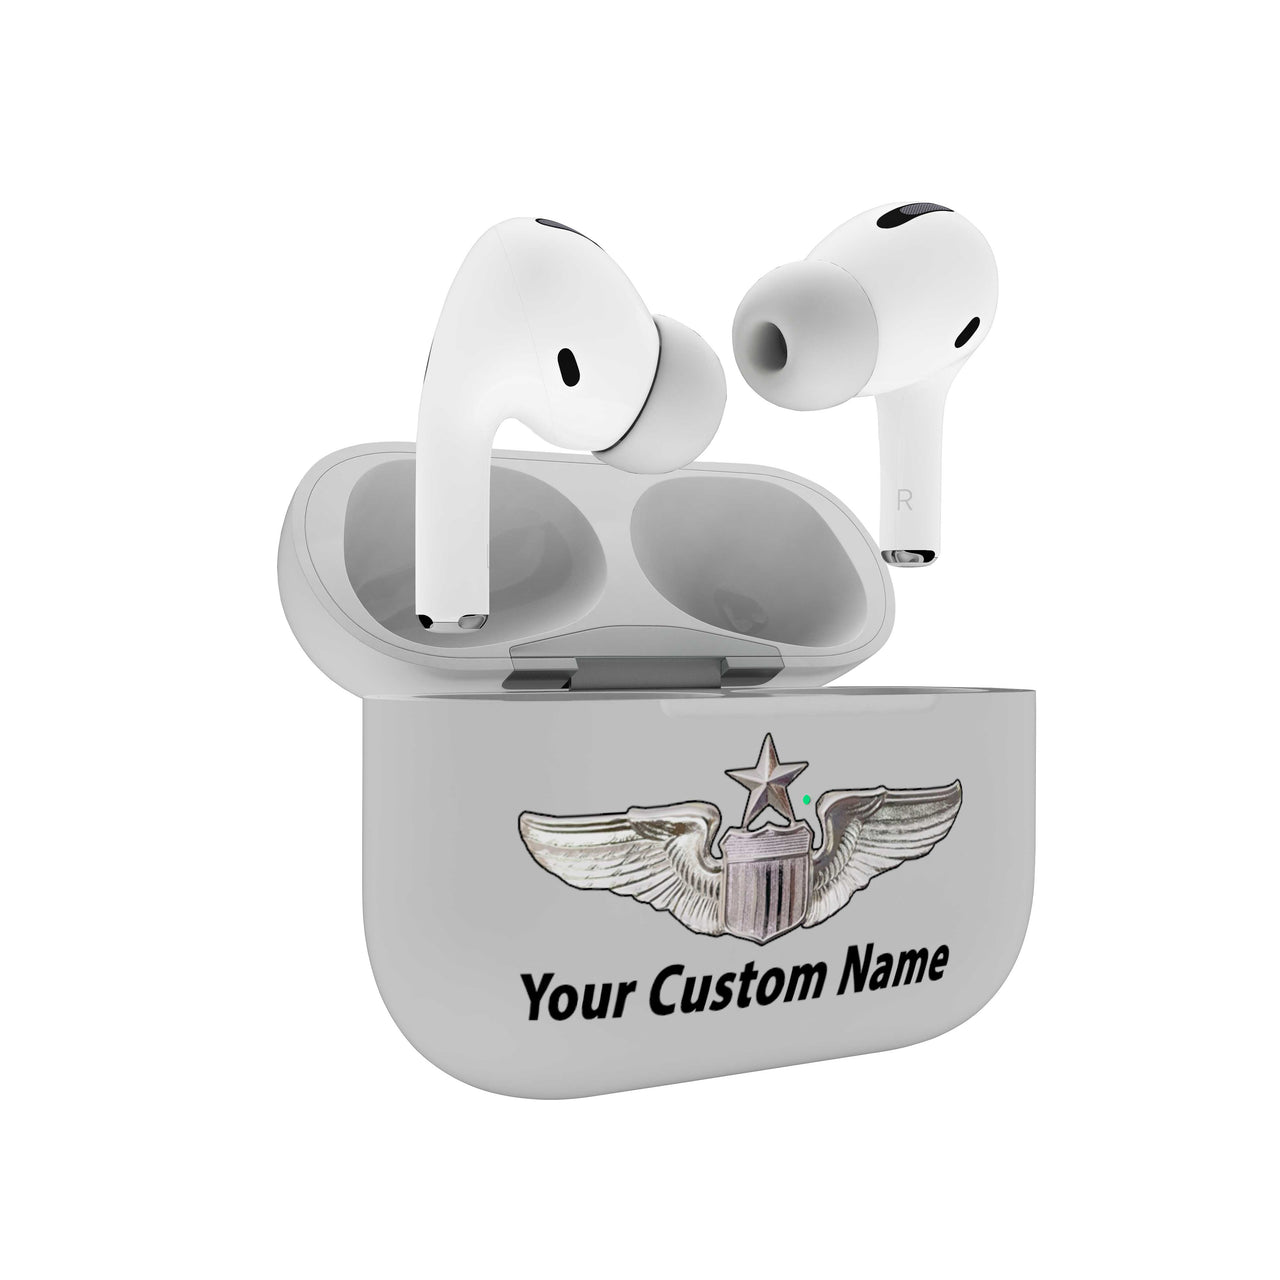 Custom Name (US Air Force & Star) Designed Airpods "Pro" Cases